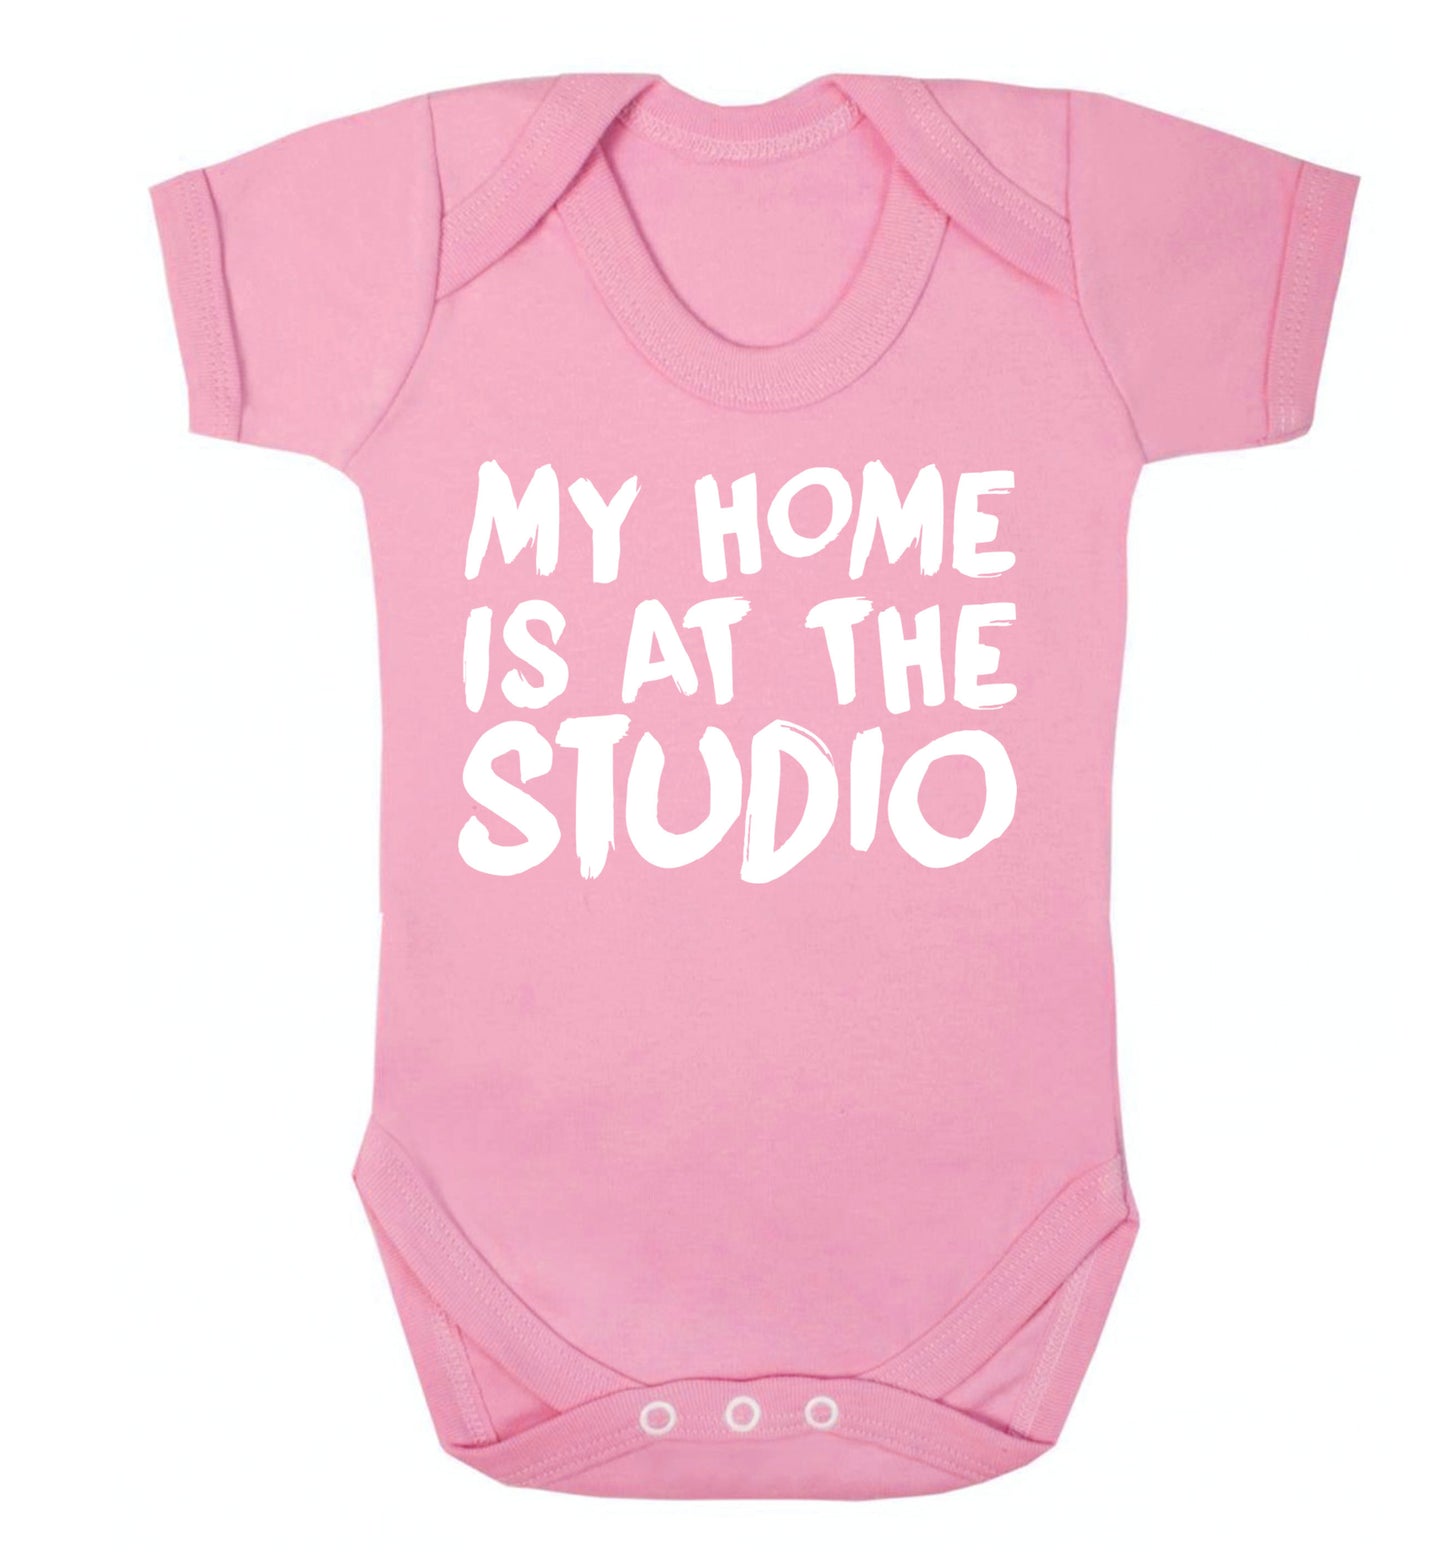 My home is at the studio Baby Vest pale pink 18-24 months